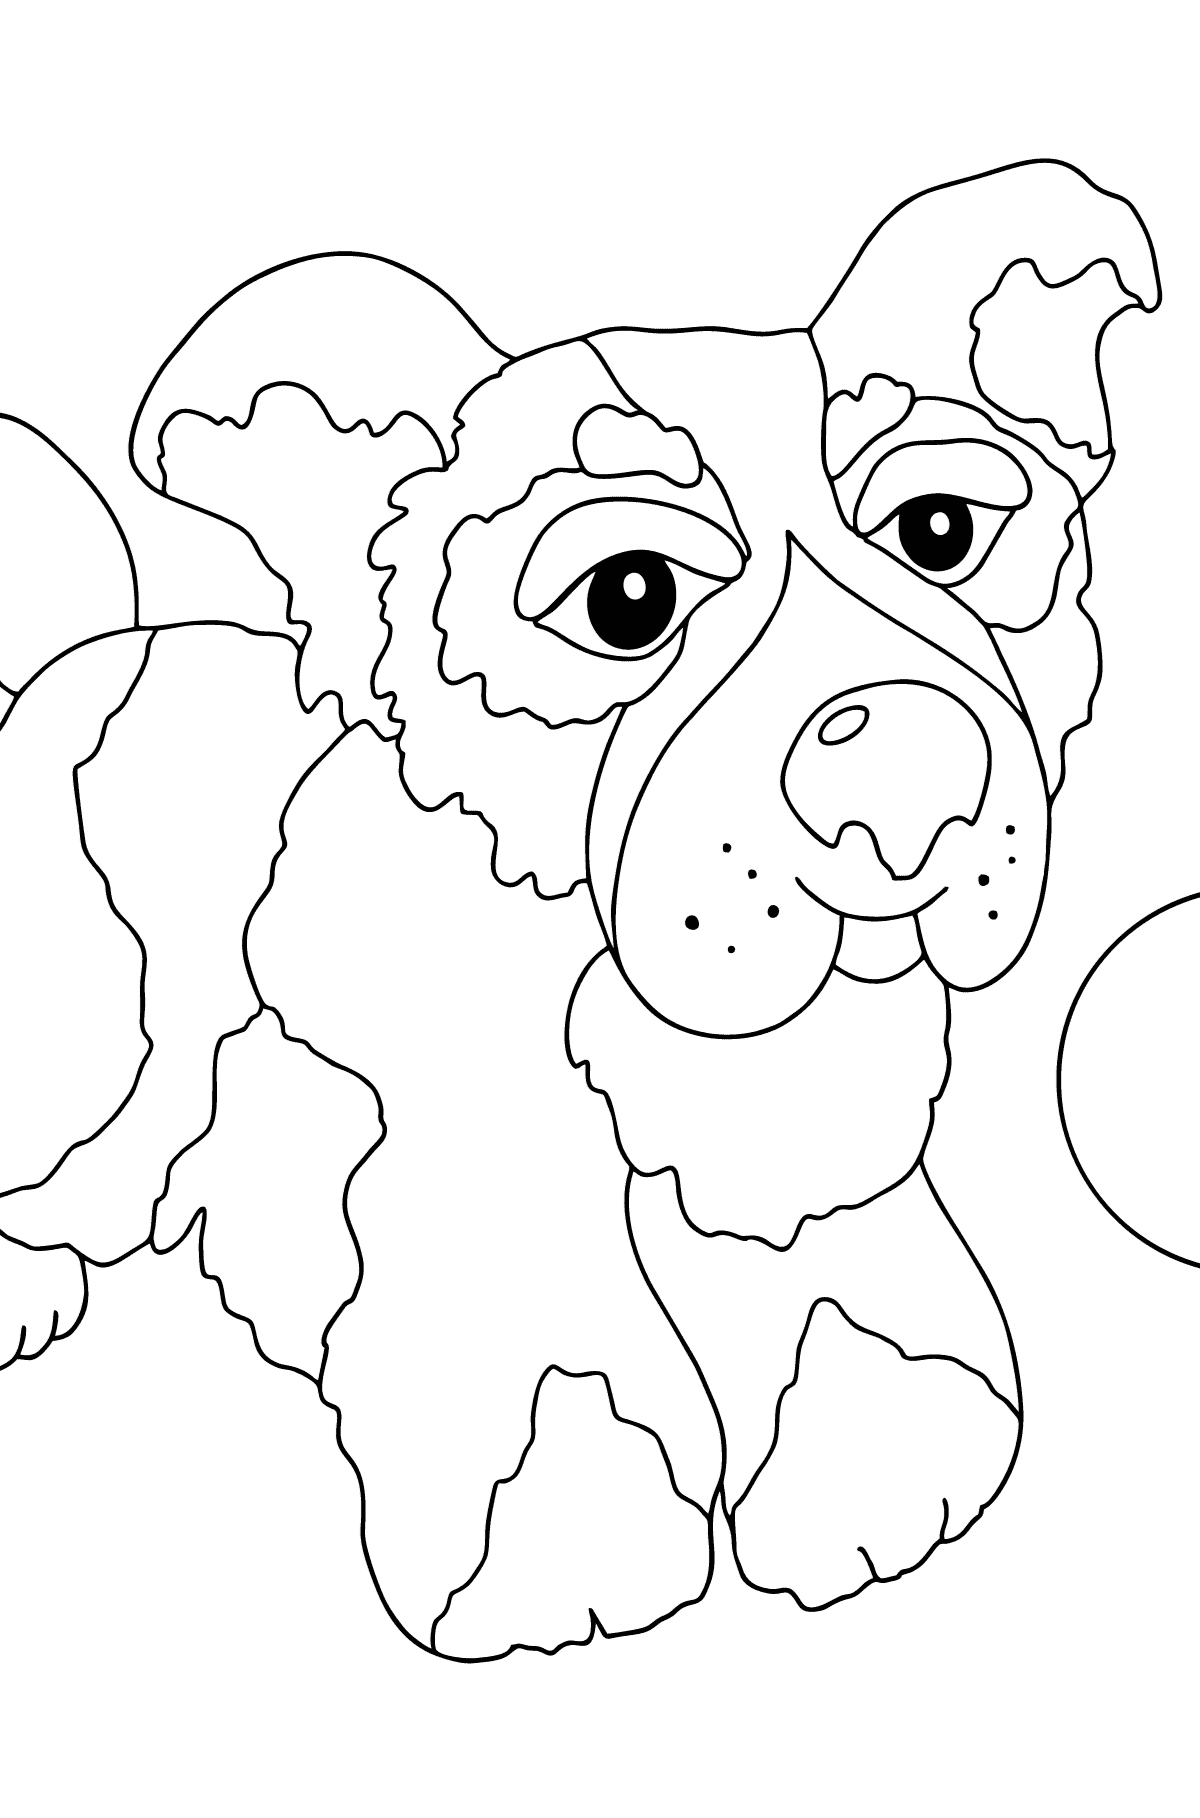 Coloring Page - A Dog is Jumping with a Blue Ball for Kids 